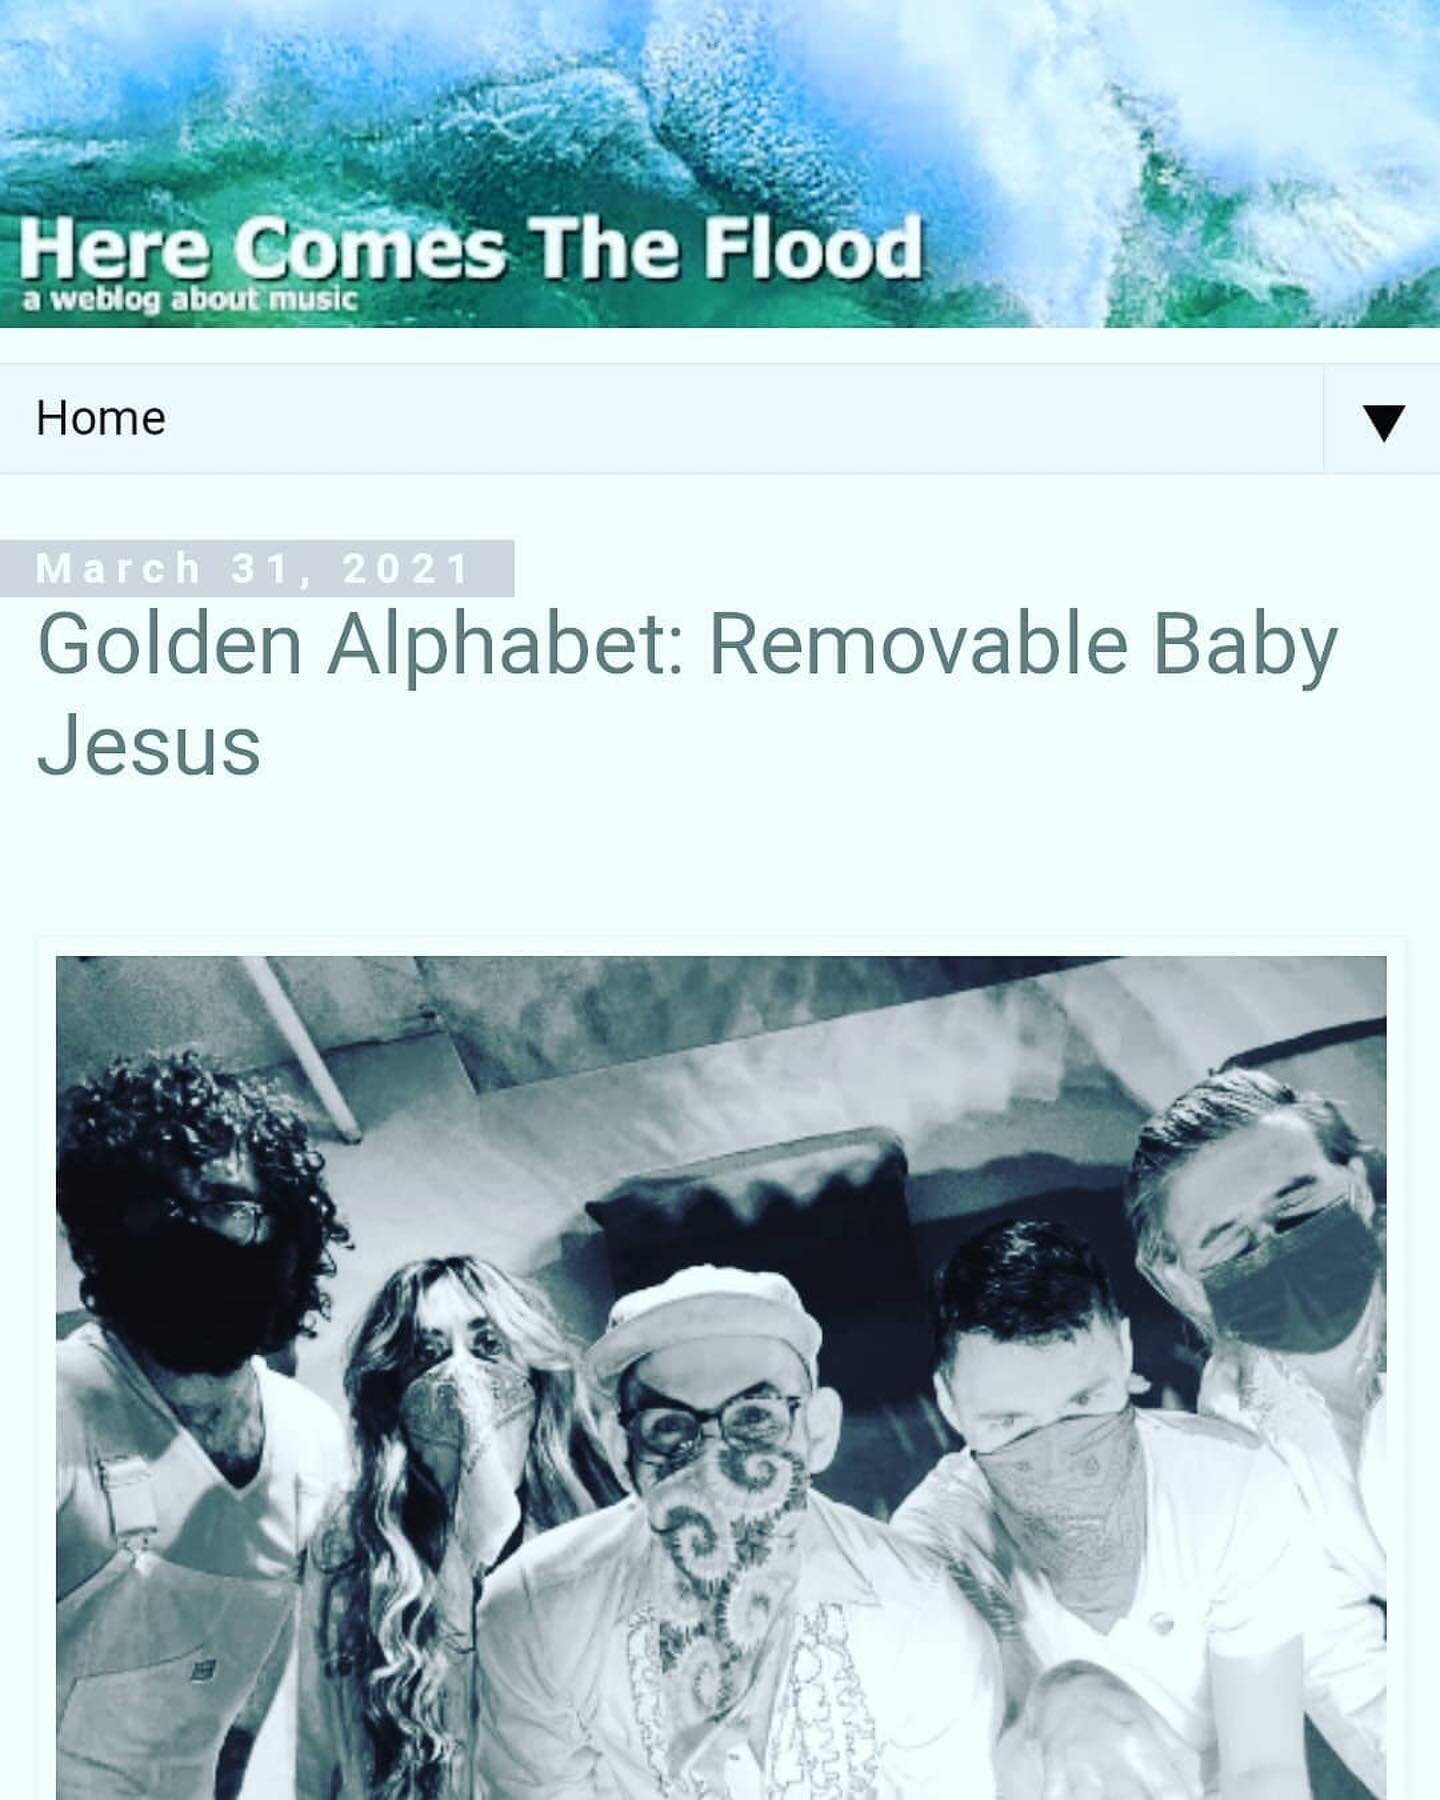 big thanks to @herecomestheflood for this rad review of the @goldenalphabet LP Removable Baby Jesus!
Why don&rsquo;t you go check it out? There&rsquo;s a link in my bio. Also, there&rsquo;s a link to pick up that LP from our Bandcamp, why don&rsquo;t